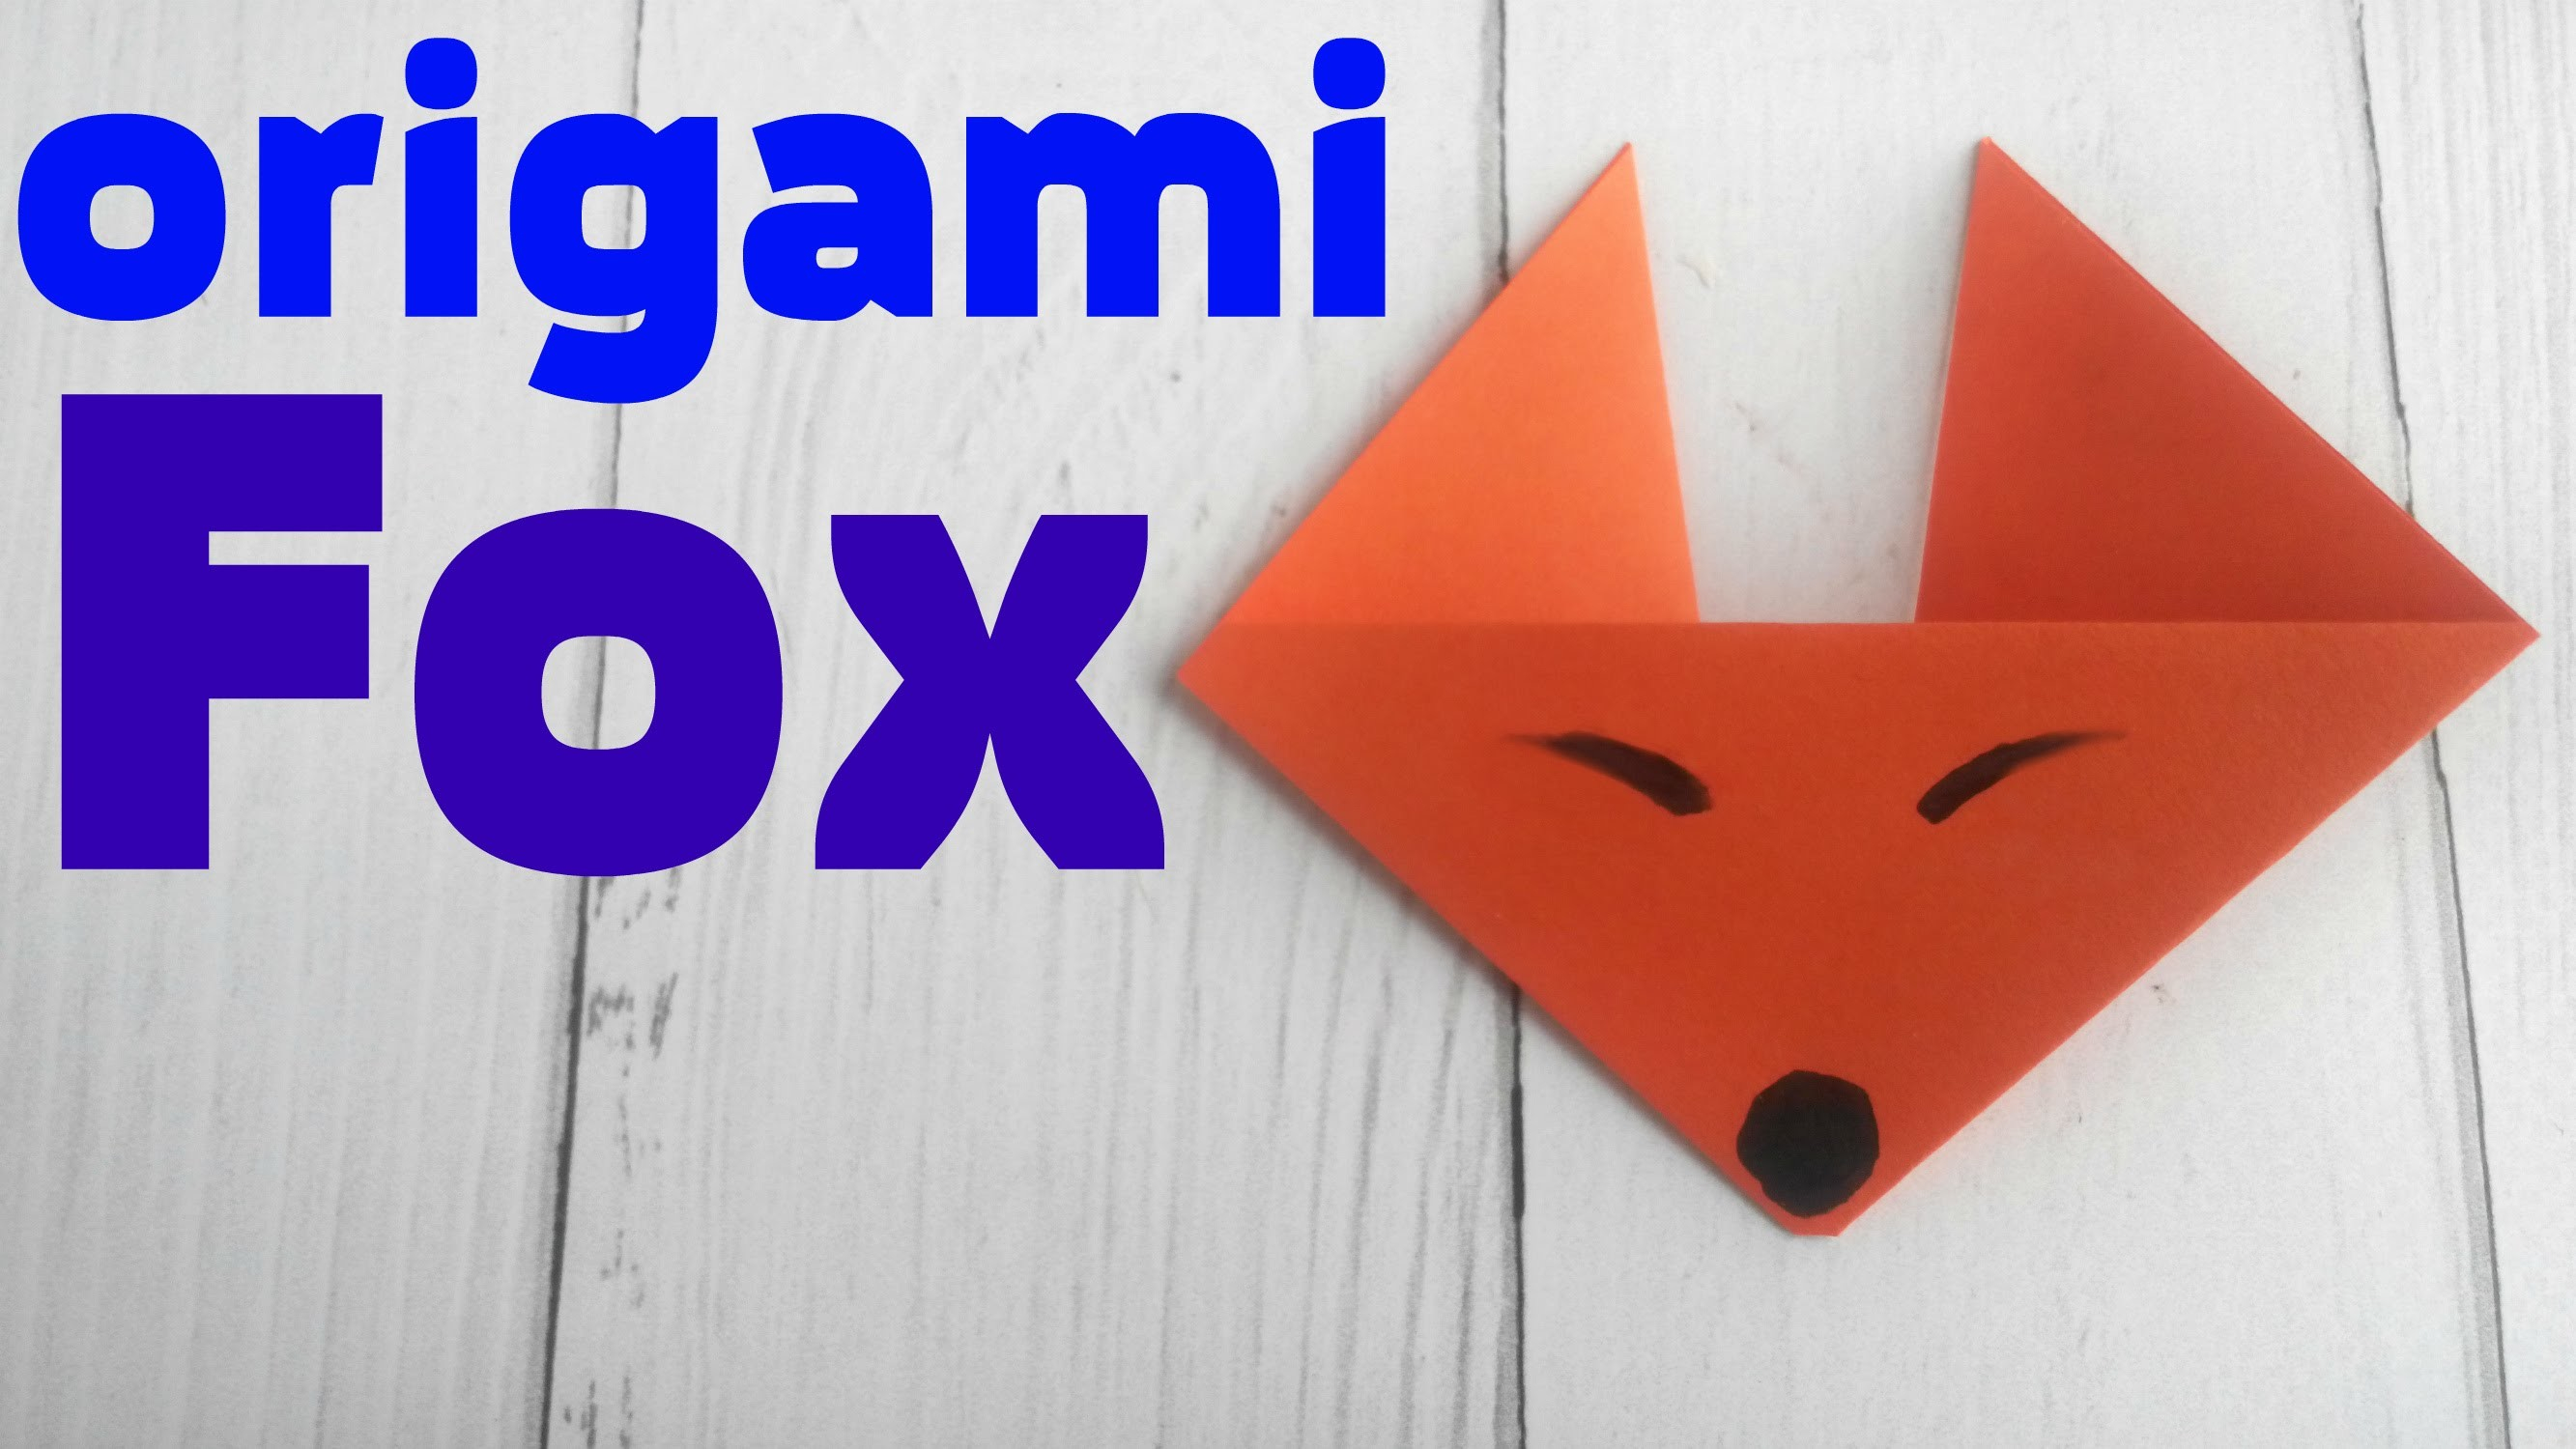 Origami Fox Face Origami Fox Face Easy Tutorial 3d Instructions Origami Diagrams For